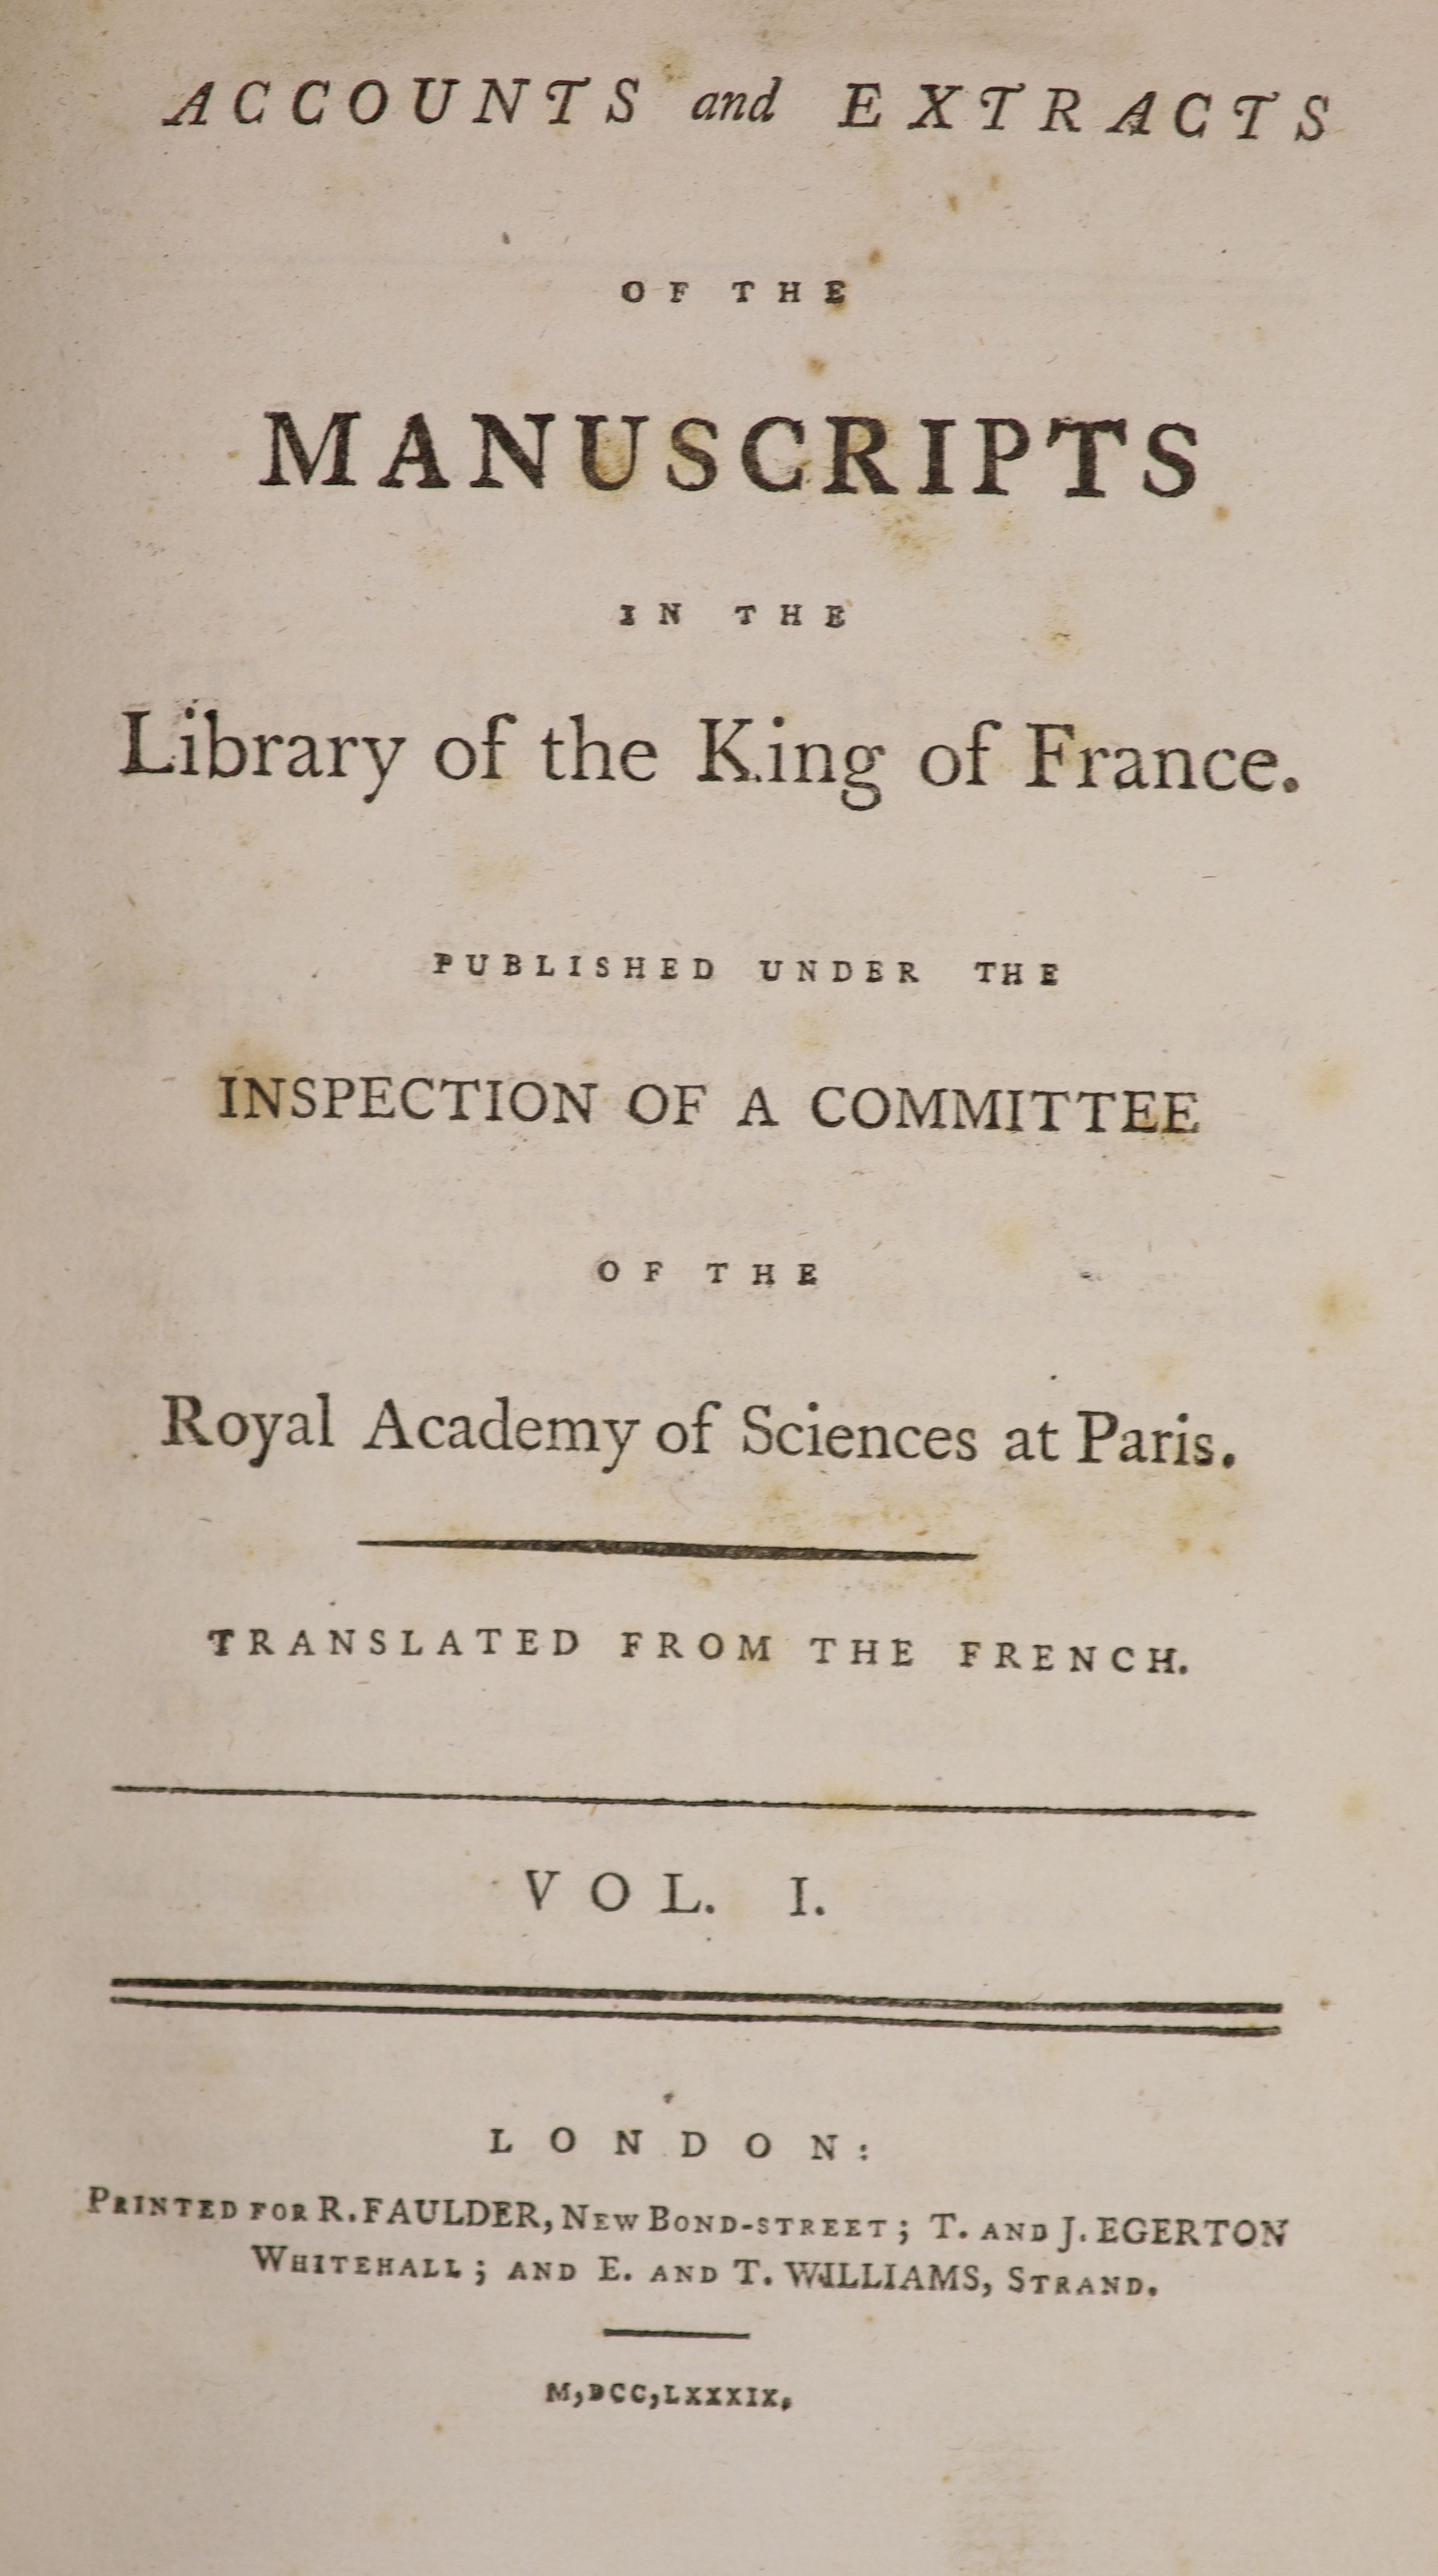 Royal Academy of Sciences at Paris. Accounts and Extracts of the Manuscripts in the Library of the King of France…